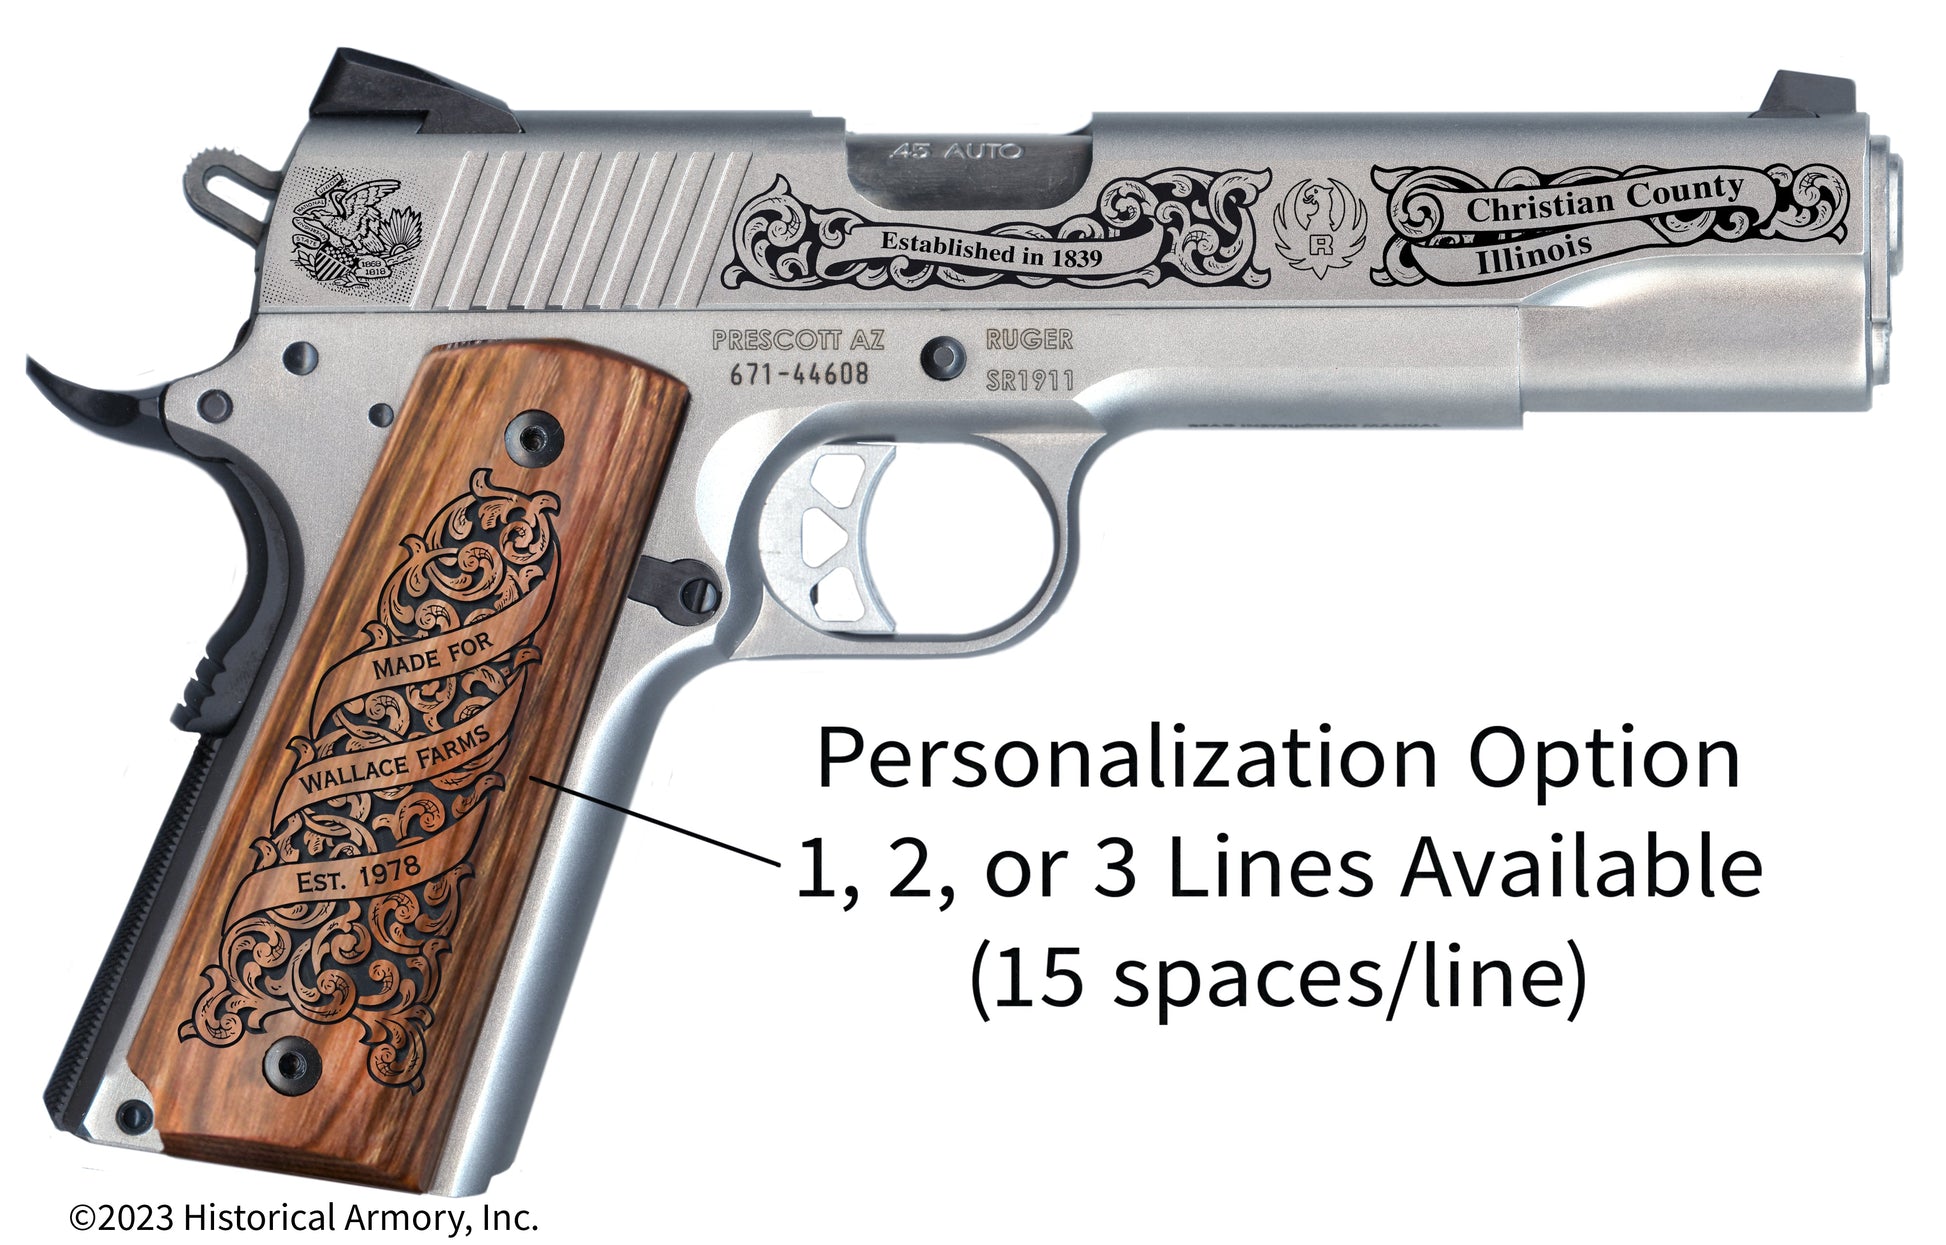 Christian County Illinois Personalized Engraved .45 Auto Ruger 1911